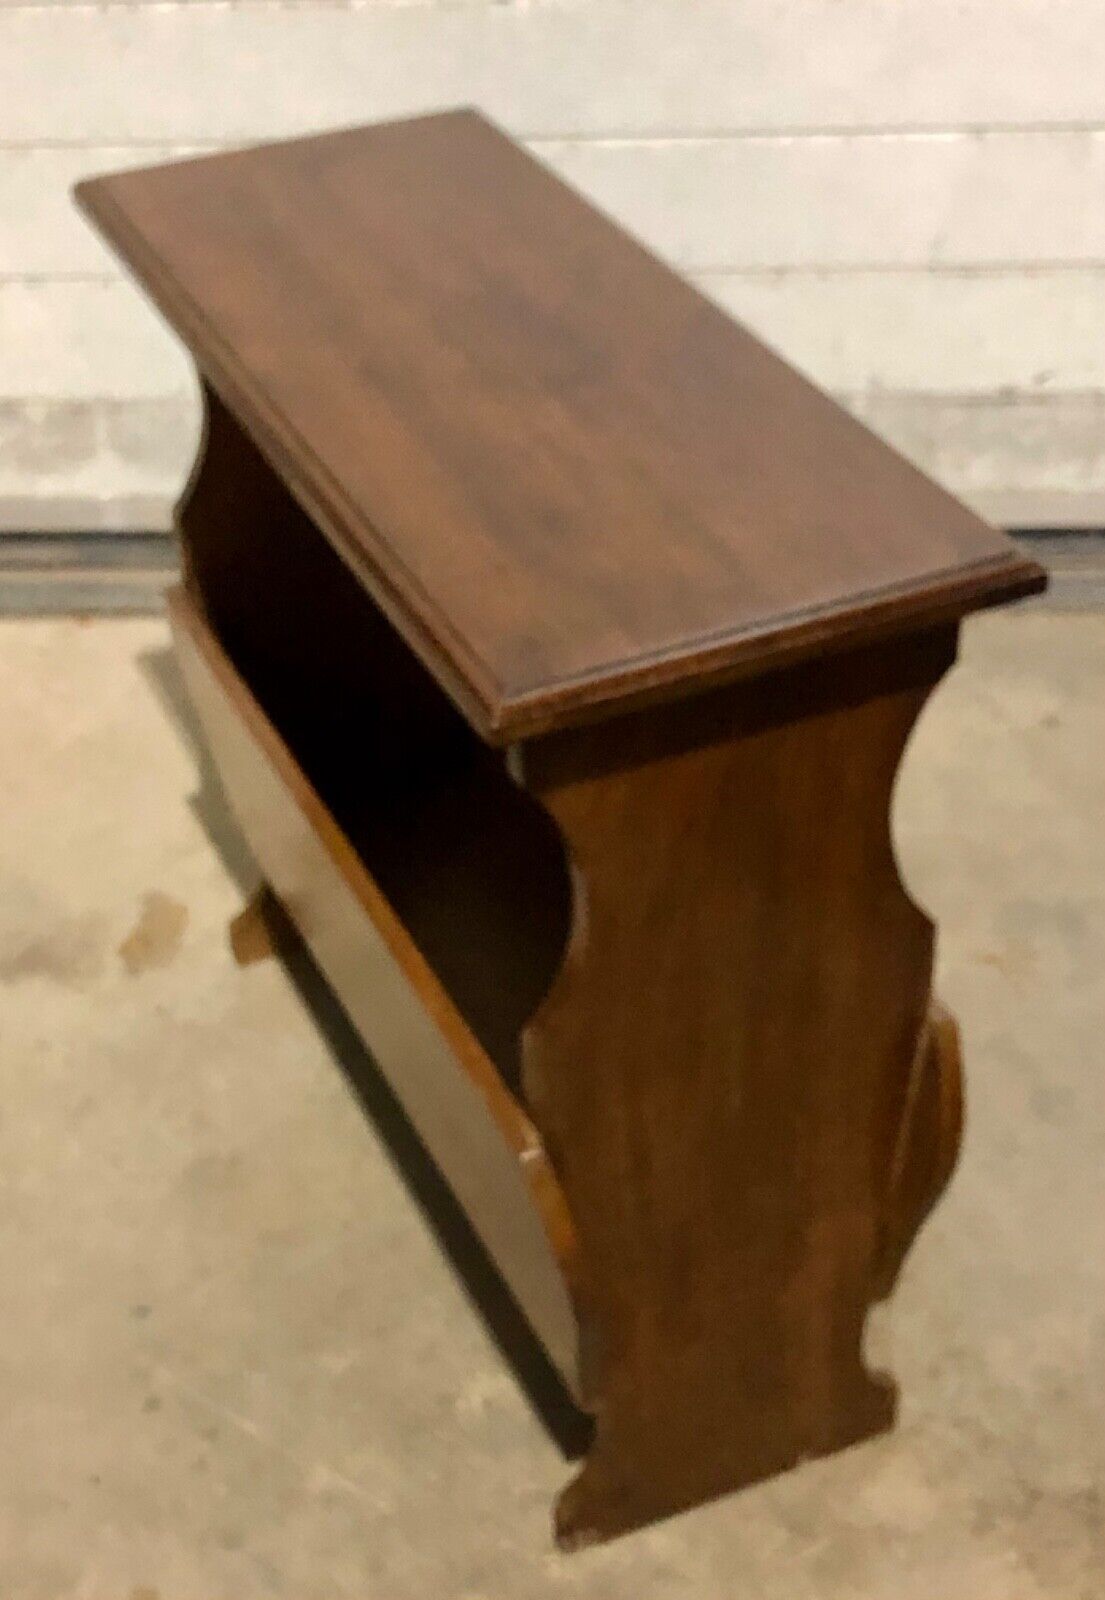 000746....Handsome Vintage Walnut Arts And Crafts Style Occasional Table